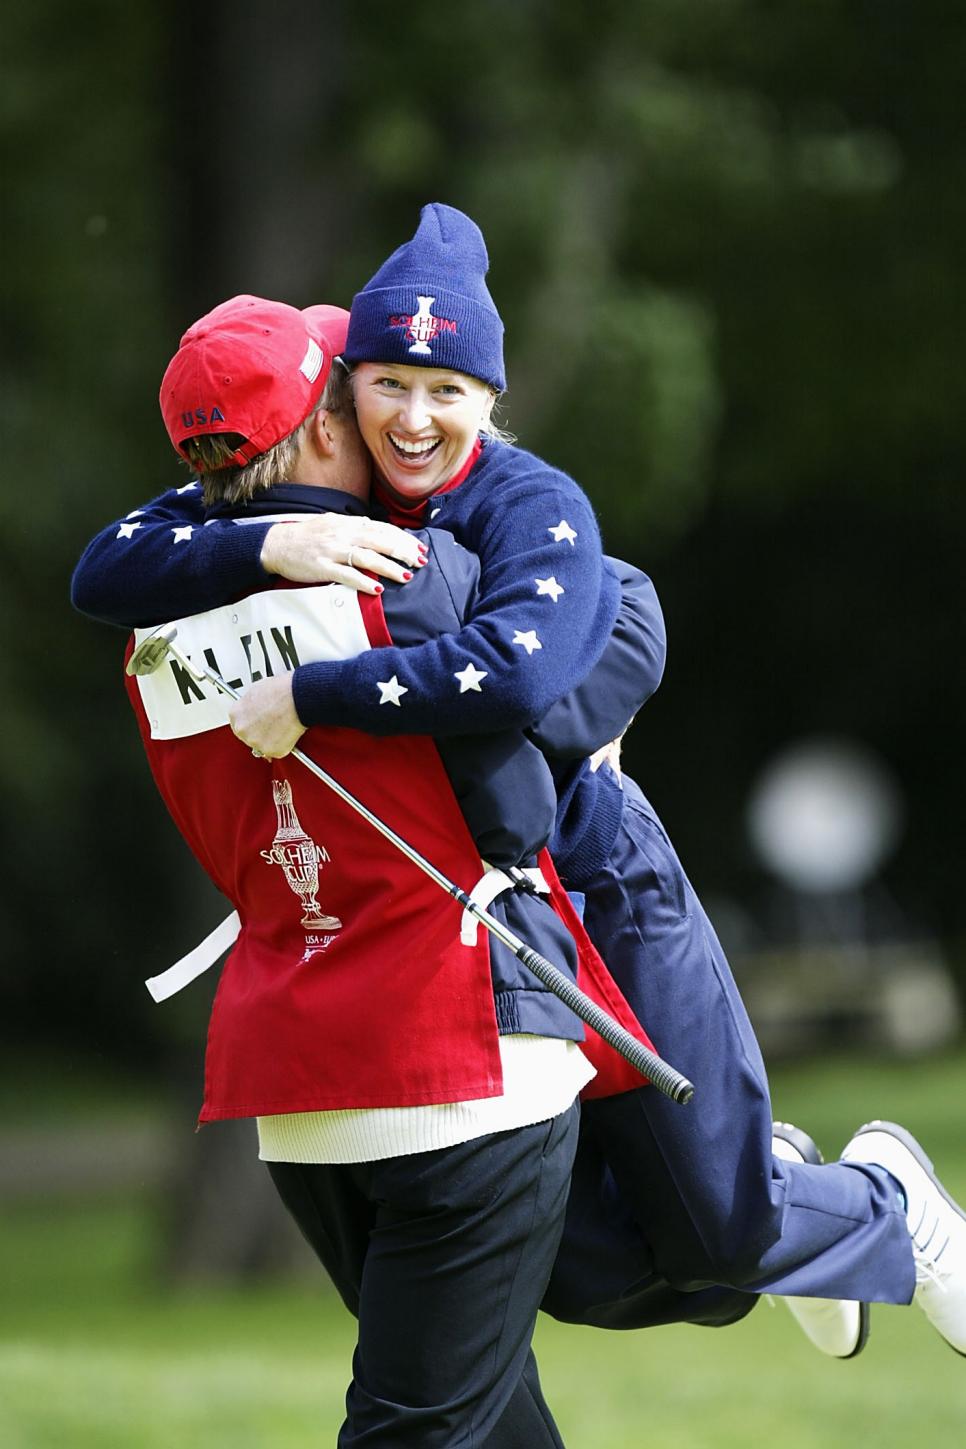 Emilee Klein of the USA jumps into her caddy's arms